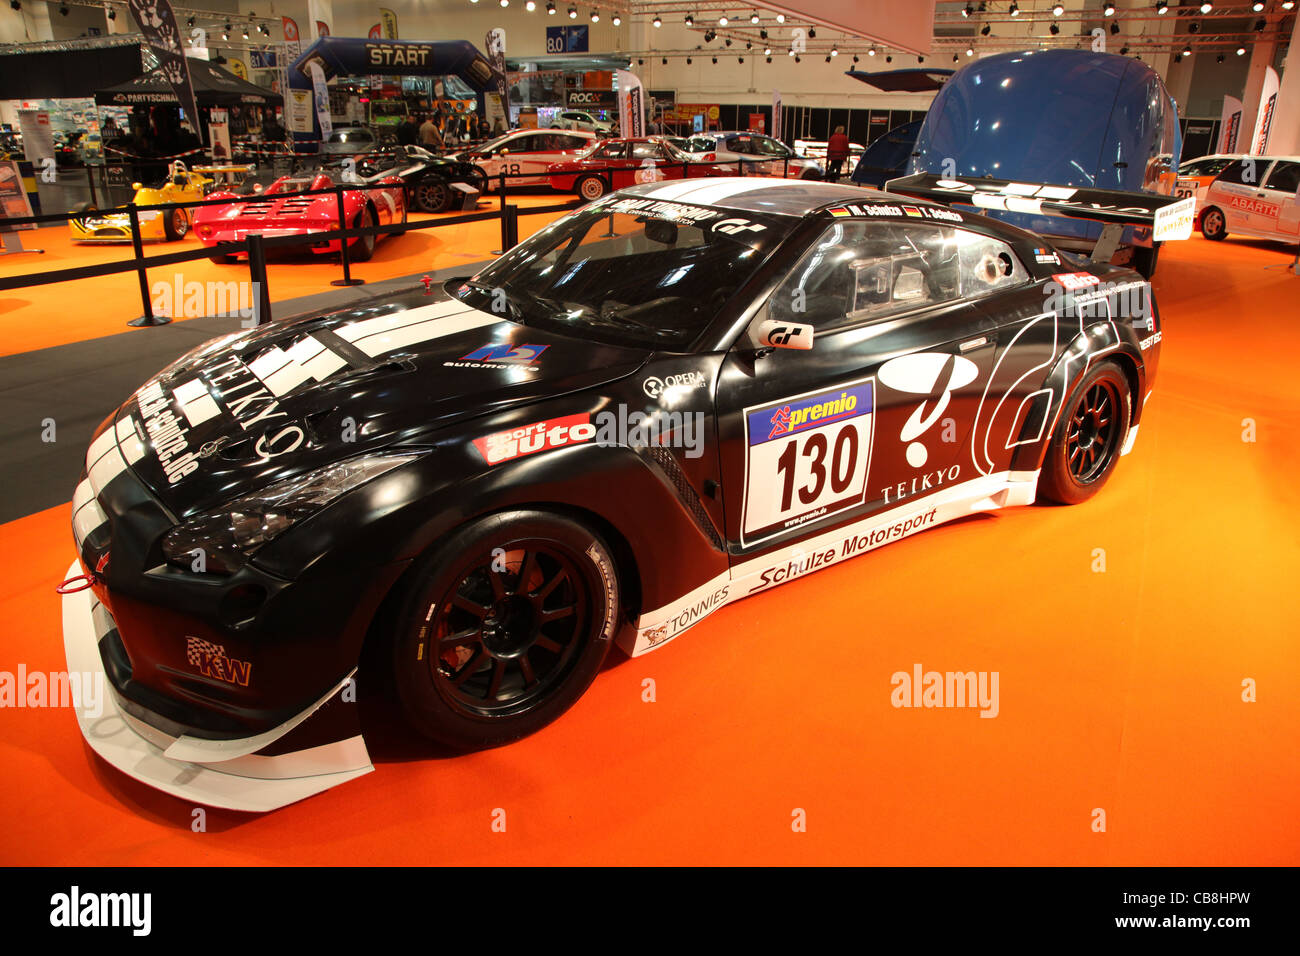 Nissan GTR R35 Racing Car shown at the Essen Motor Show in Essen, Germany, on November 29, 2011 Stock Photo